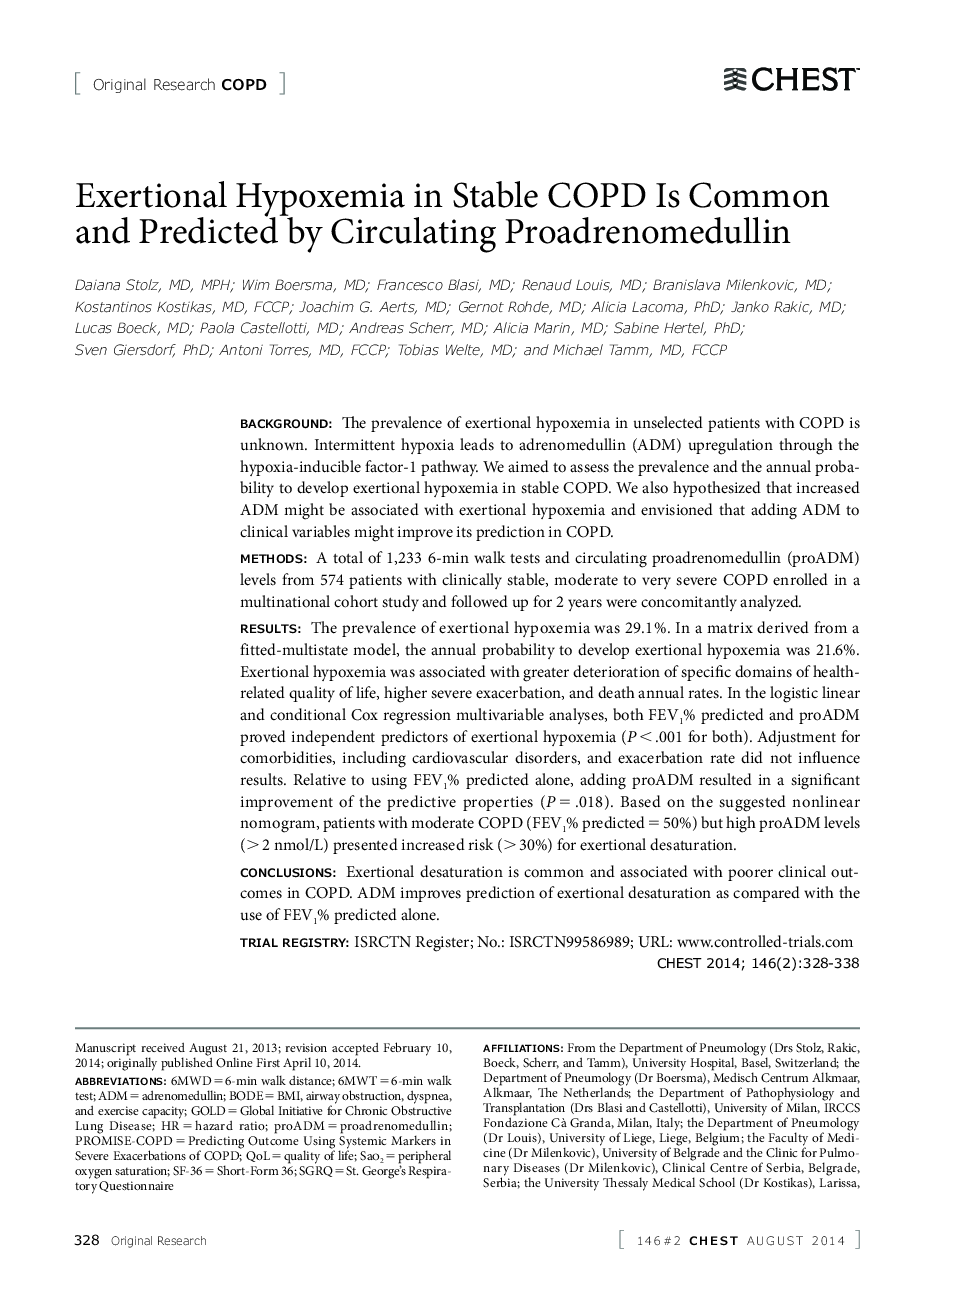 Exertional Hypoxemia in Stable COPD Is Common and Predicted by Circulating Proadrenomedullin